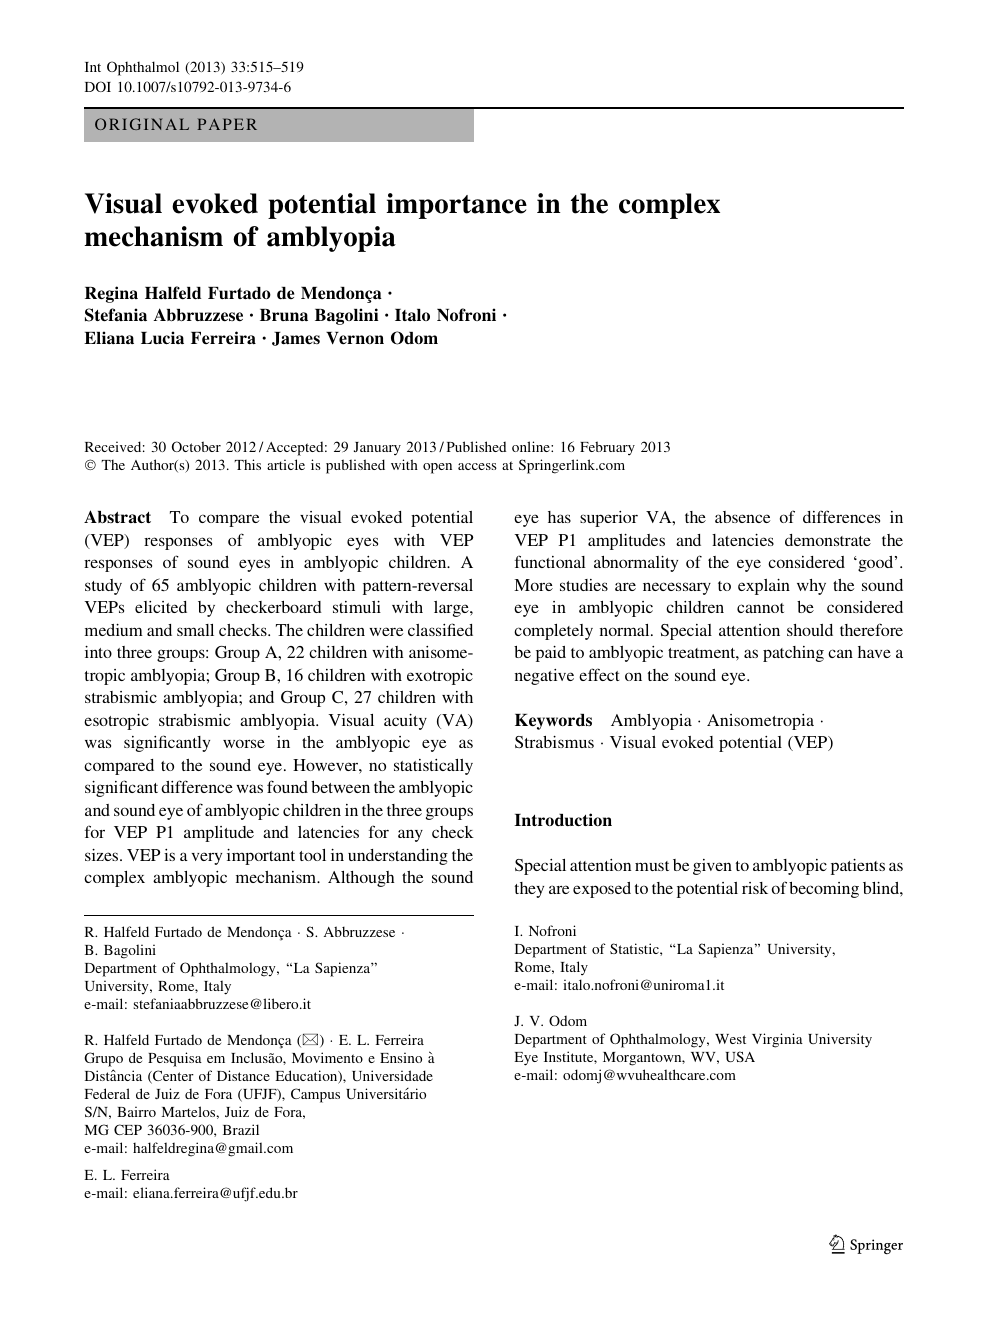 Visual Evoked Potential Importance In The Complex Mechanism Of Amblyopia Topic Of Research Paper In Clinical Medicine Download Scholarly Article Pdf And Read For Free On Cyberleninka Open Science Hub